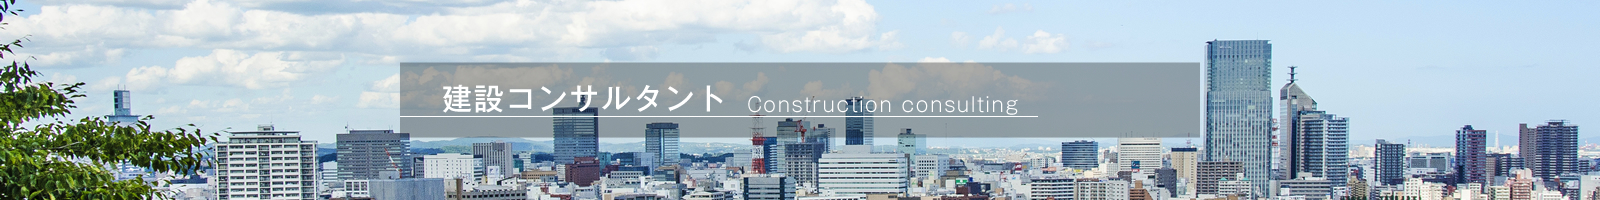 construction-consulting